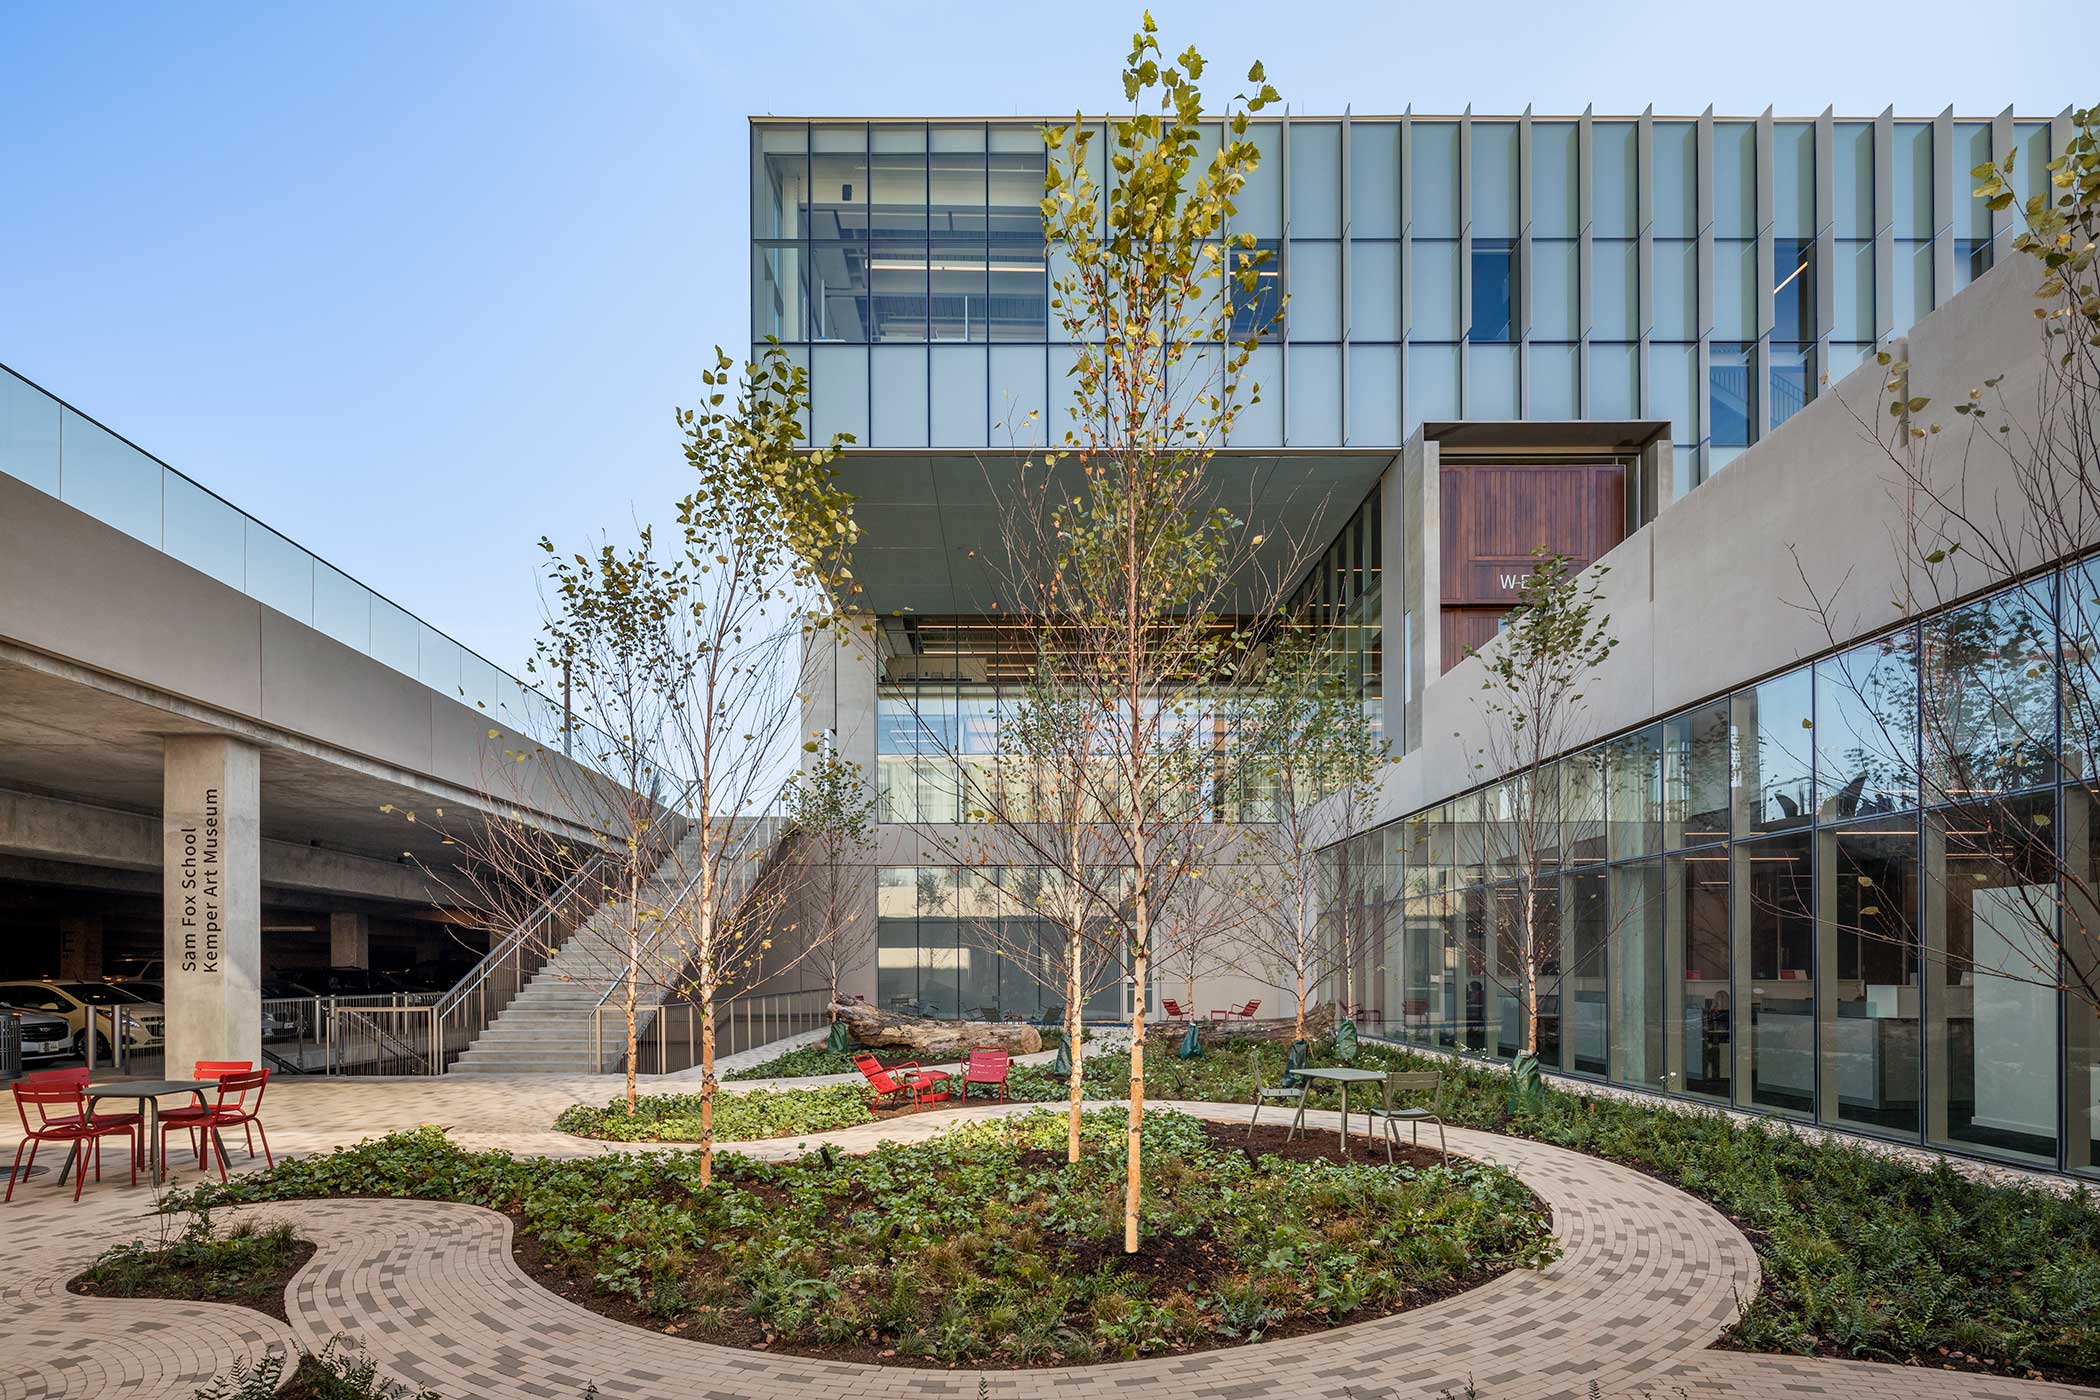 <p>A garden connects the underground parking garage to the Sam Fox School of Design & Visual Art's new Weil Hall and Tisch Park beyond. <br><small>&copy; Peter Aaron</small> </p>